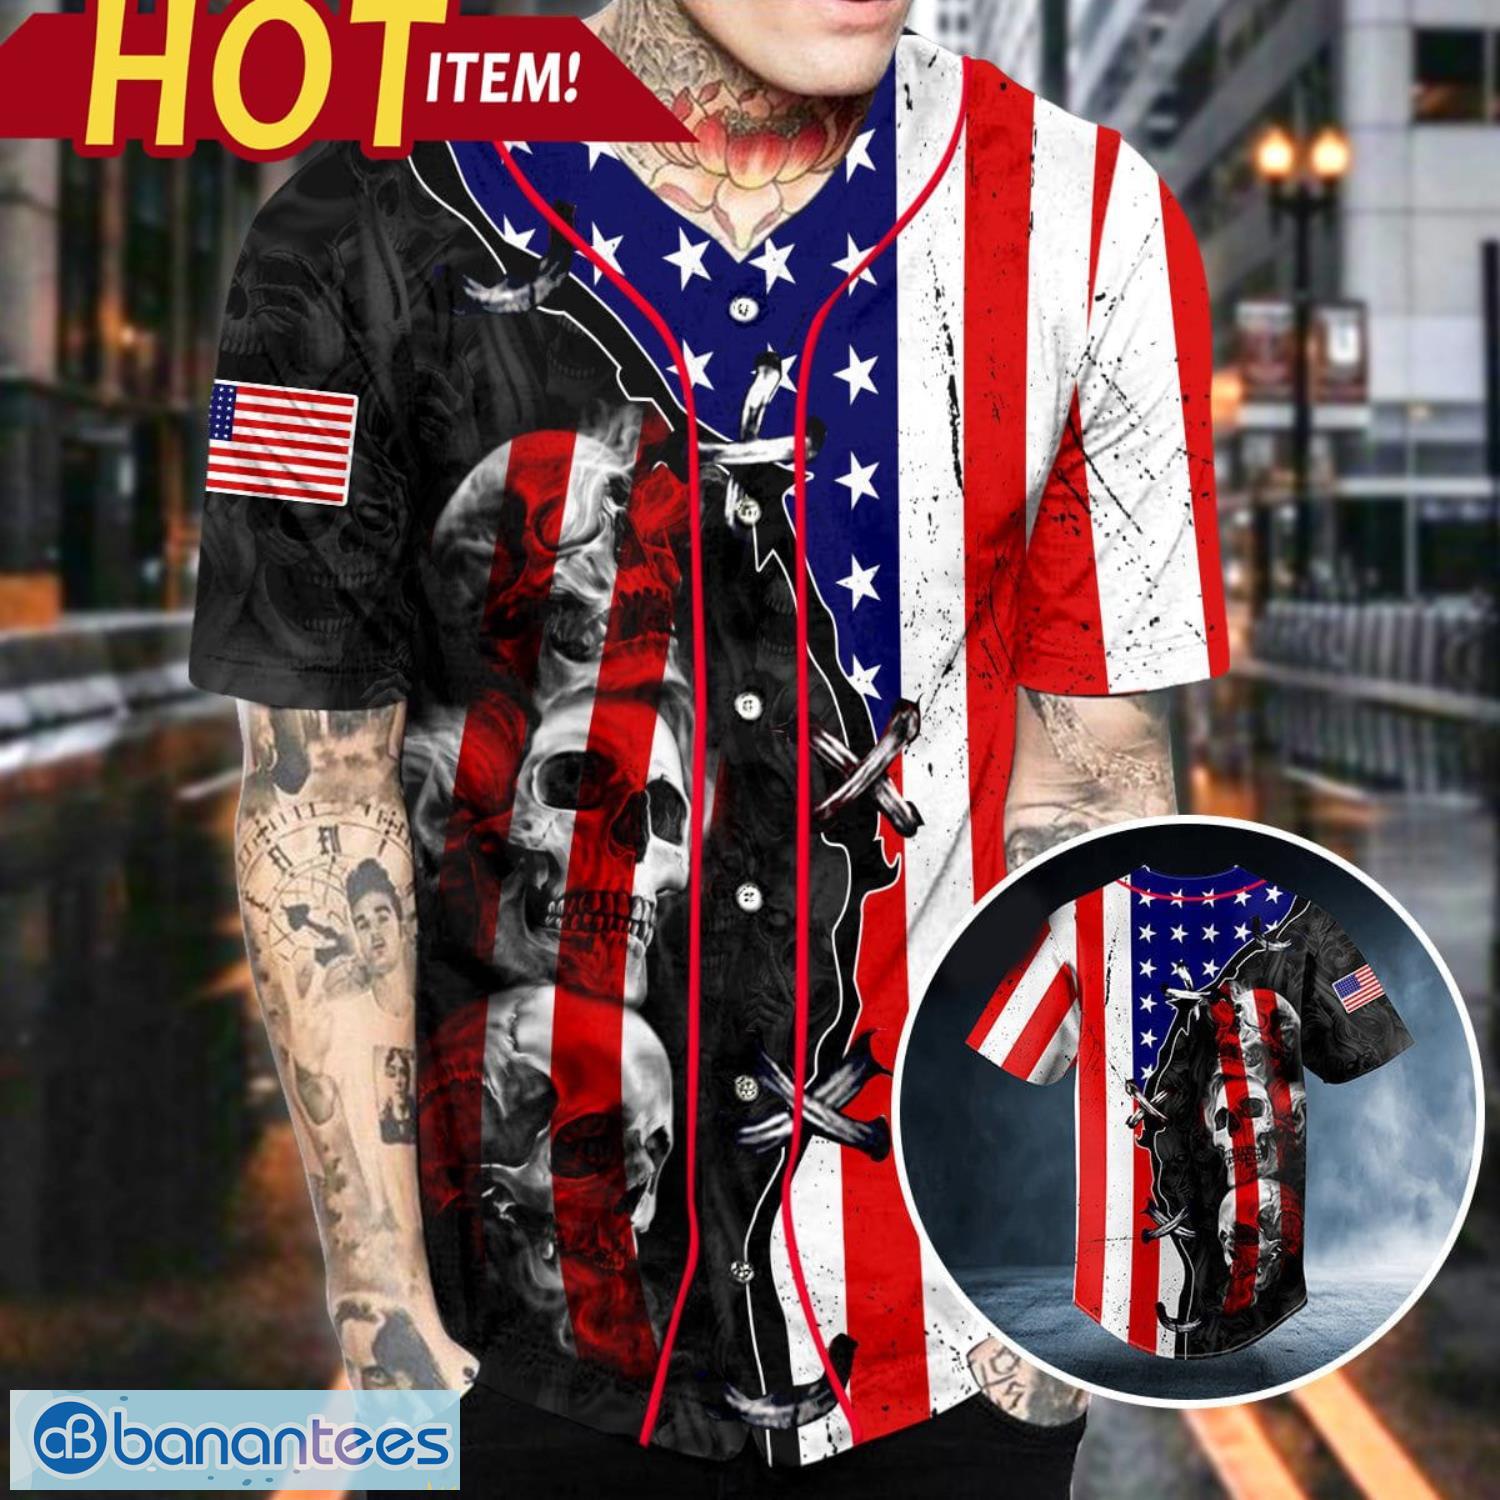  Personalized USA Baseball Jersey, American Flag Baseball Jersey  for Baseball Fans, Baseball Lovers, Patriotic Shirt (Style 1) : Clothing,  Shoes & Jewelry